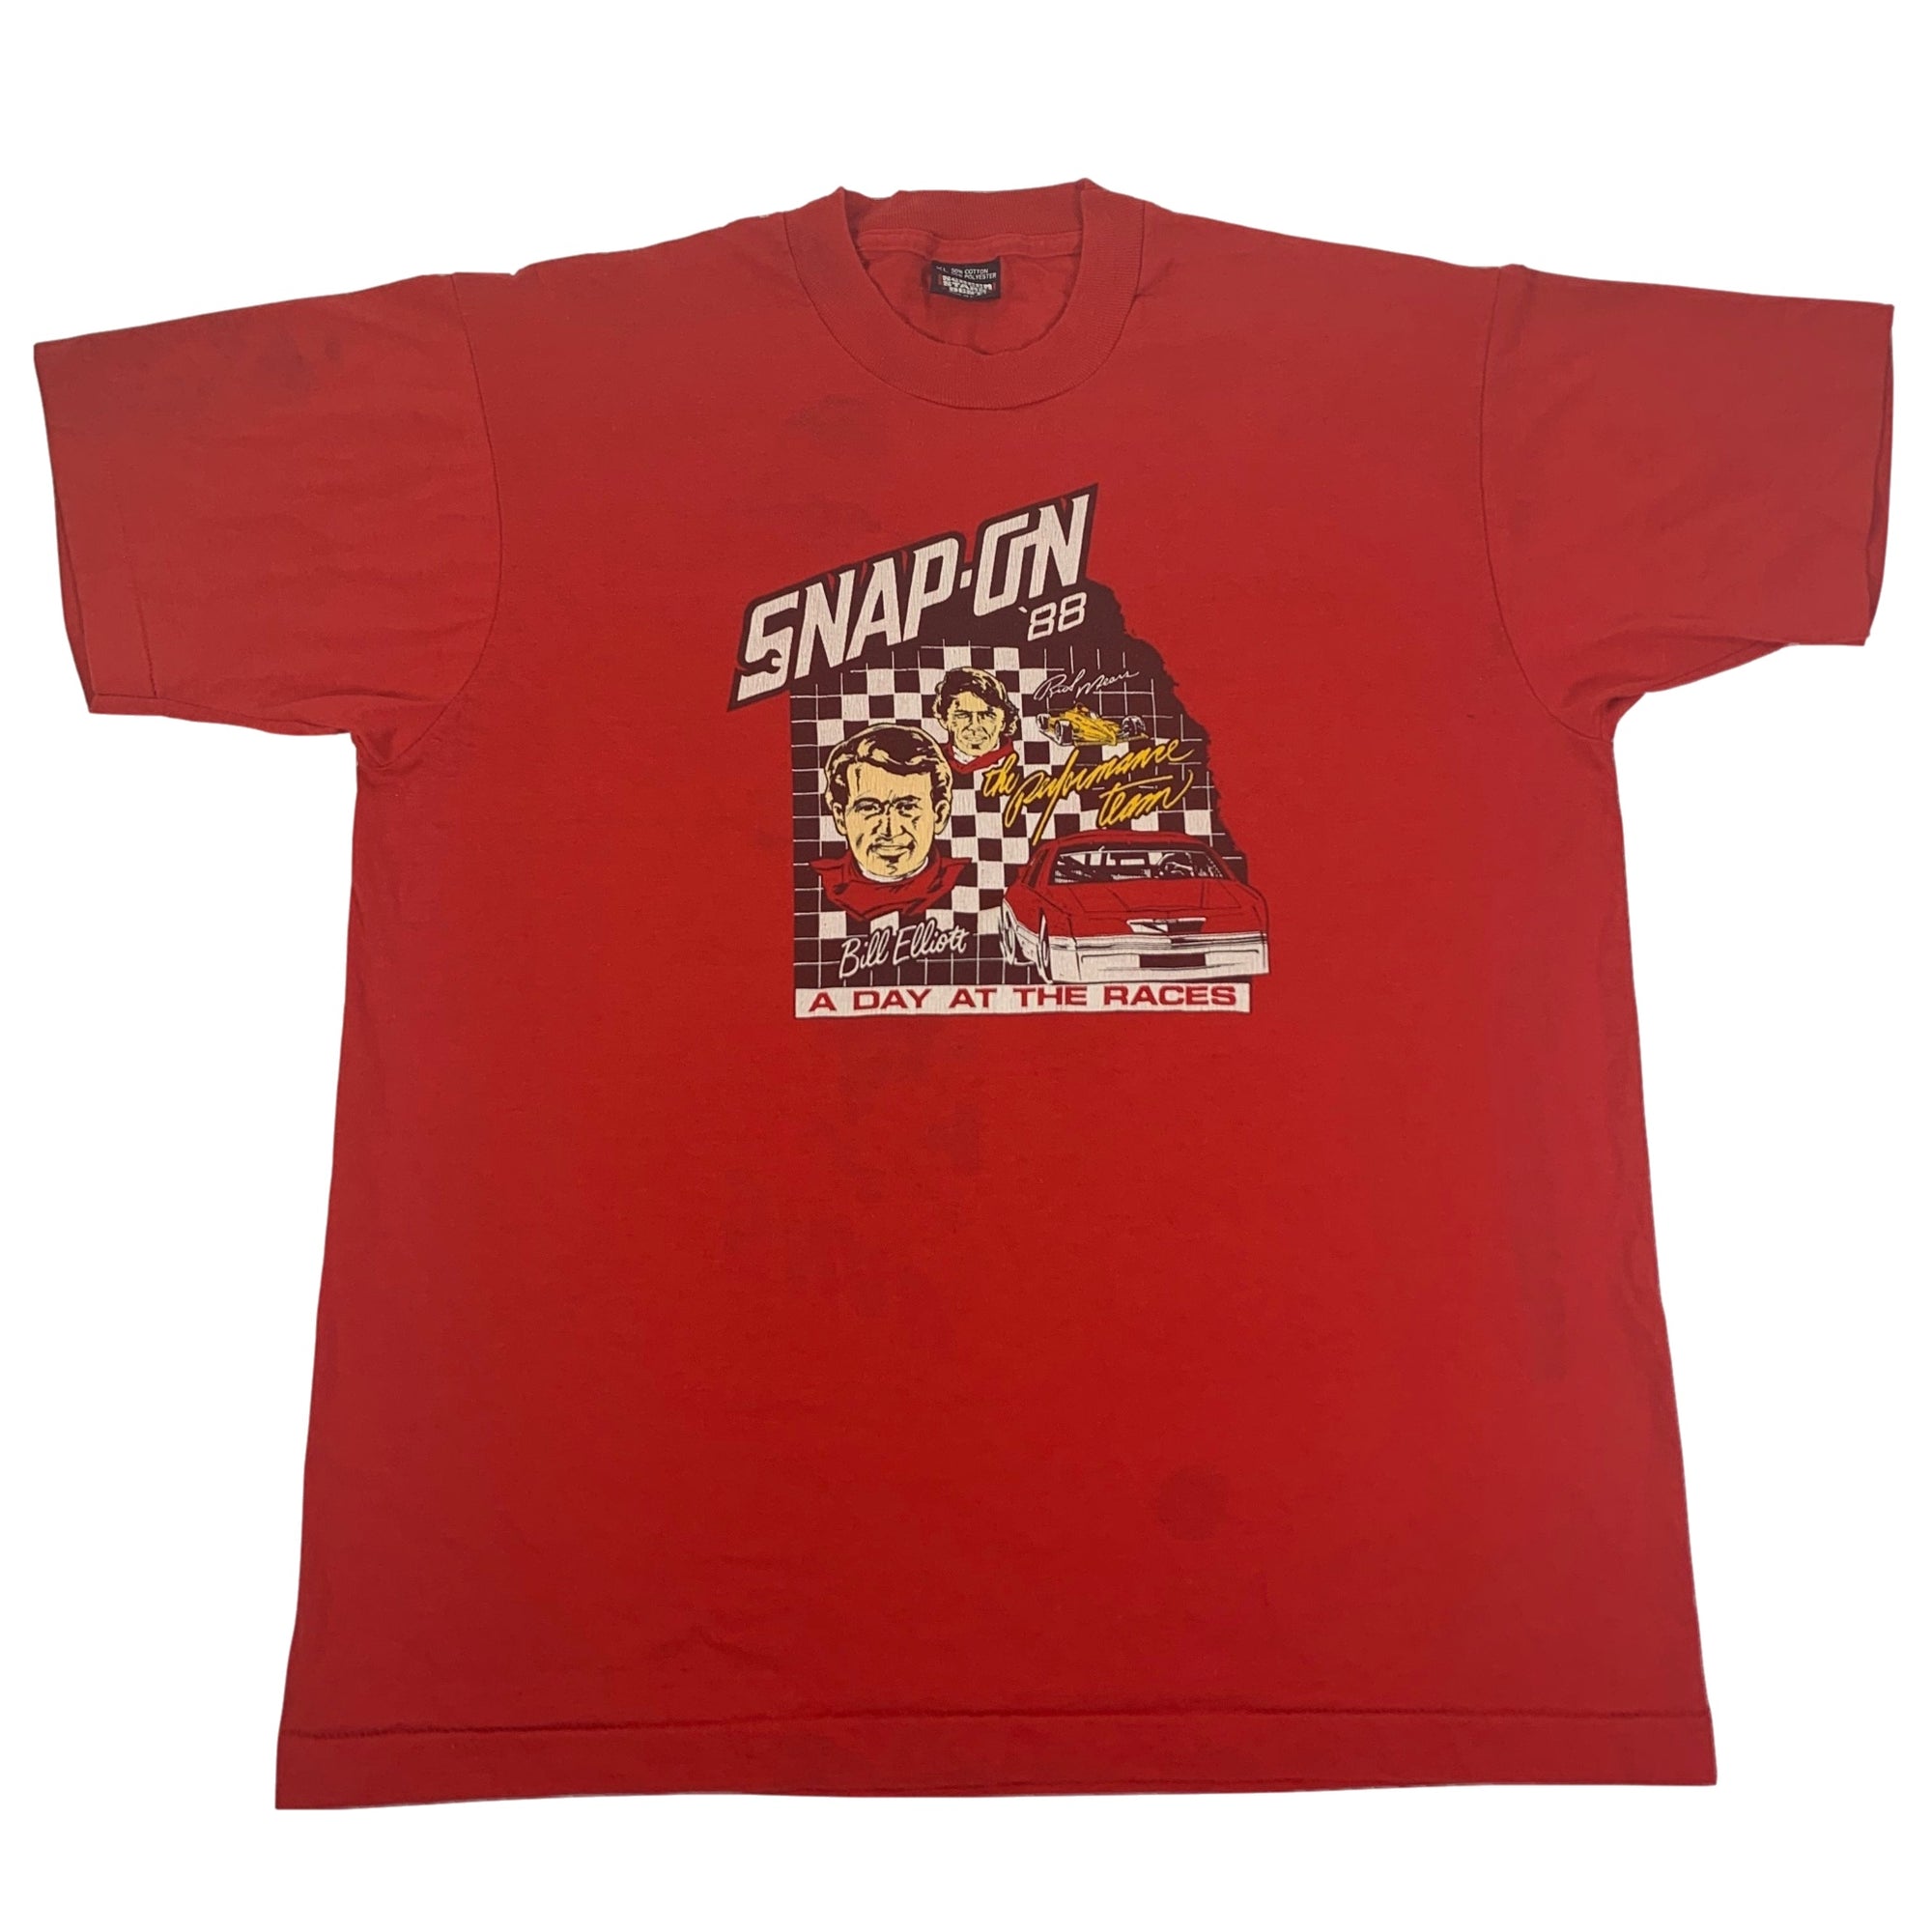 Vintage Snap-On "A Day At The Races" T-Shirt - jointcustodydc